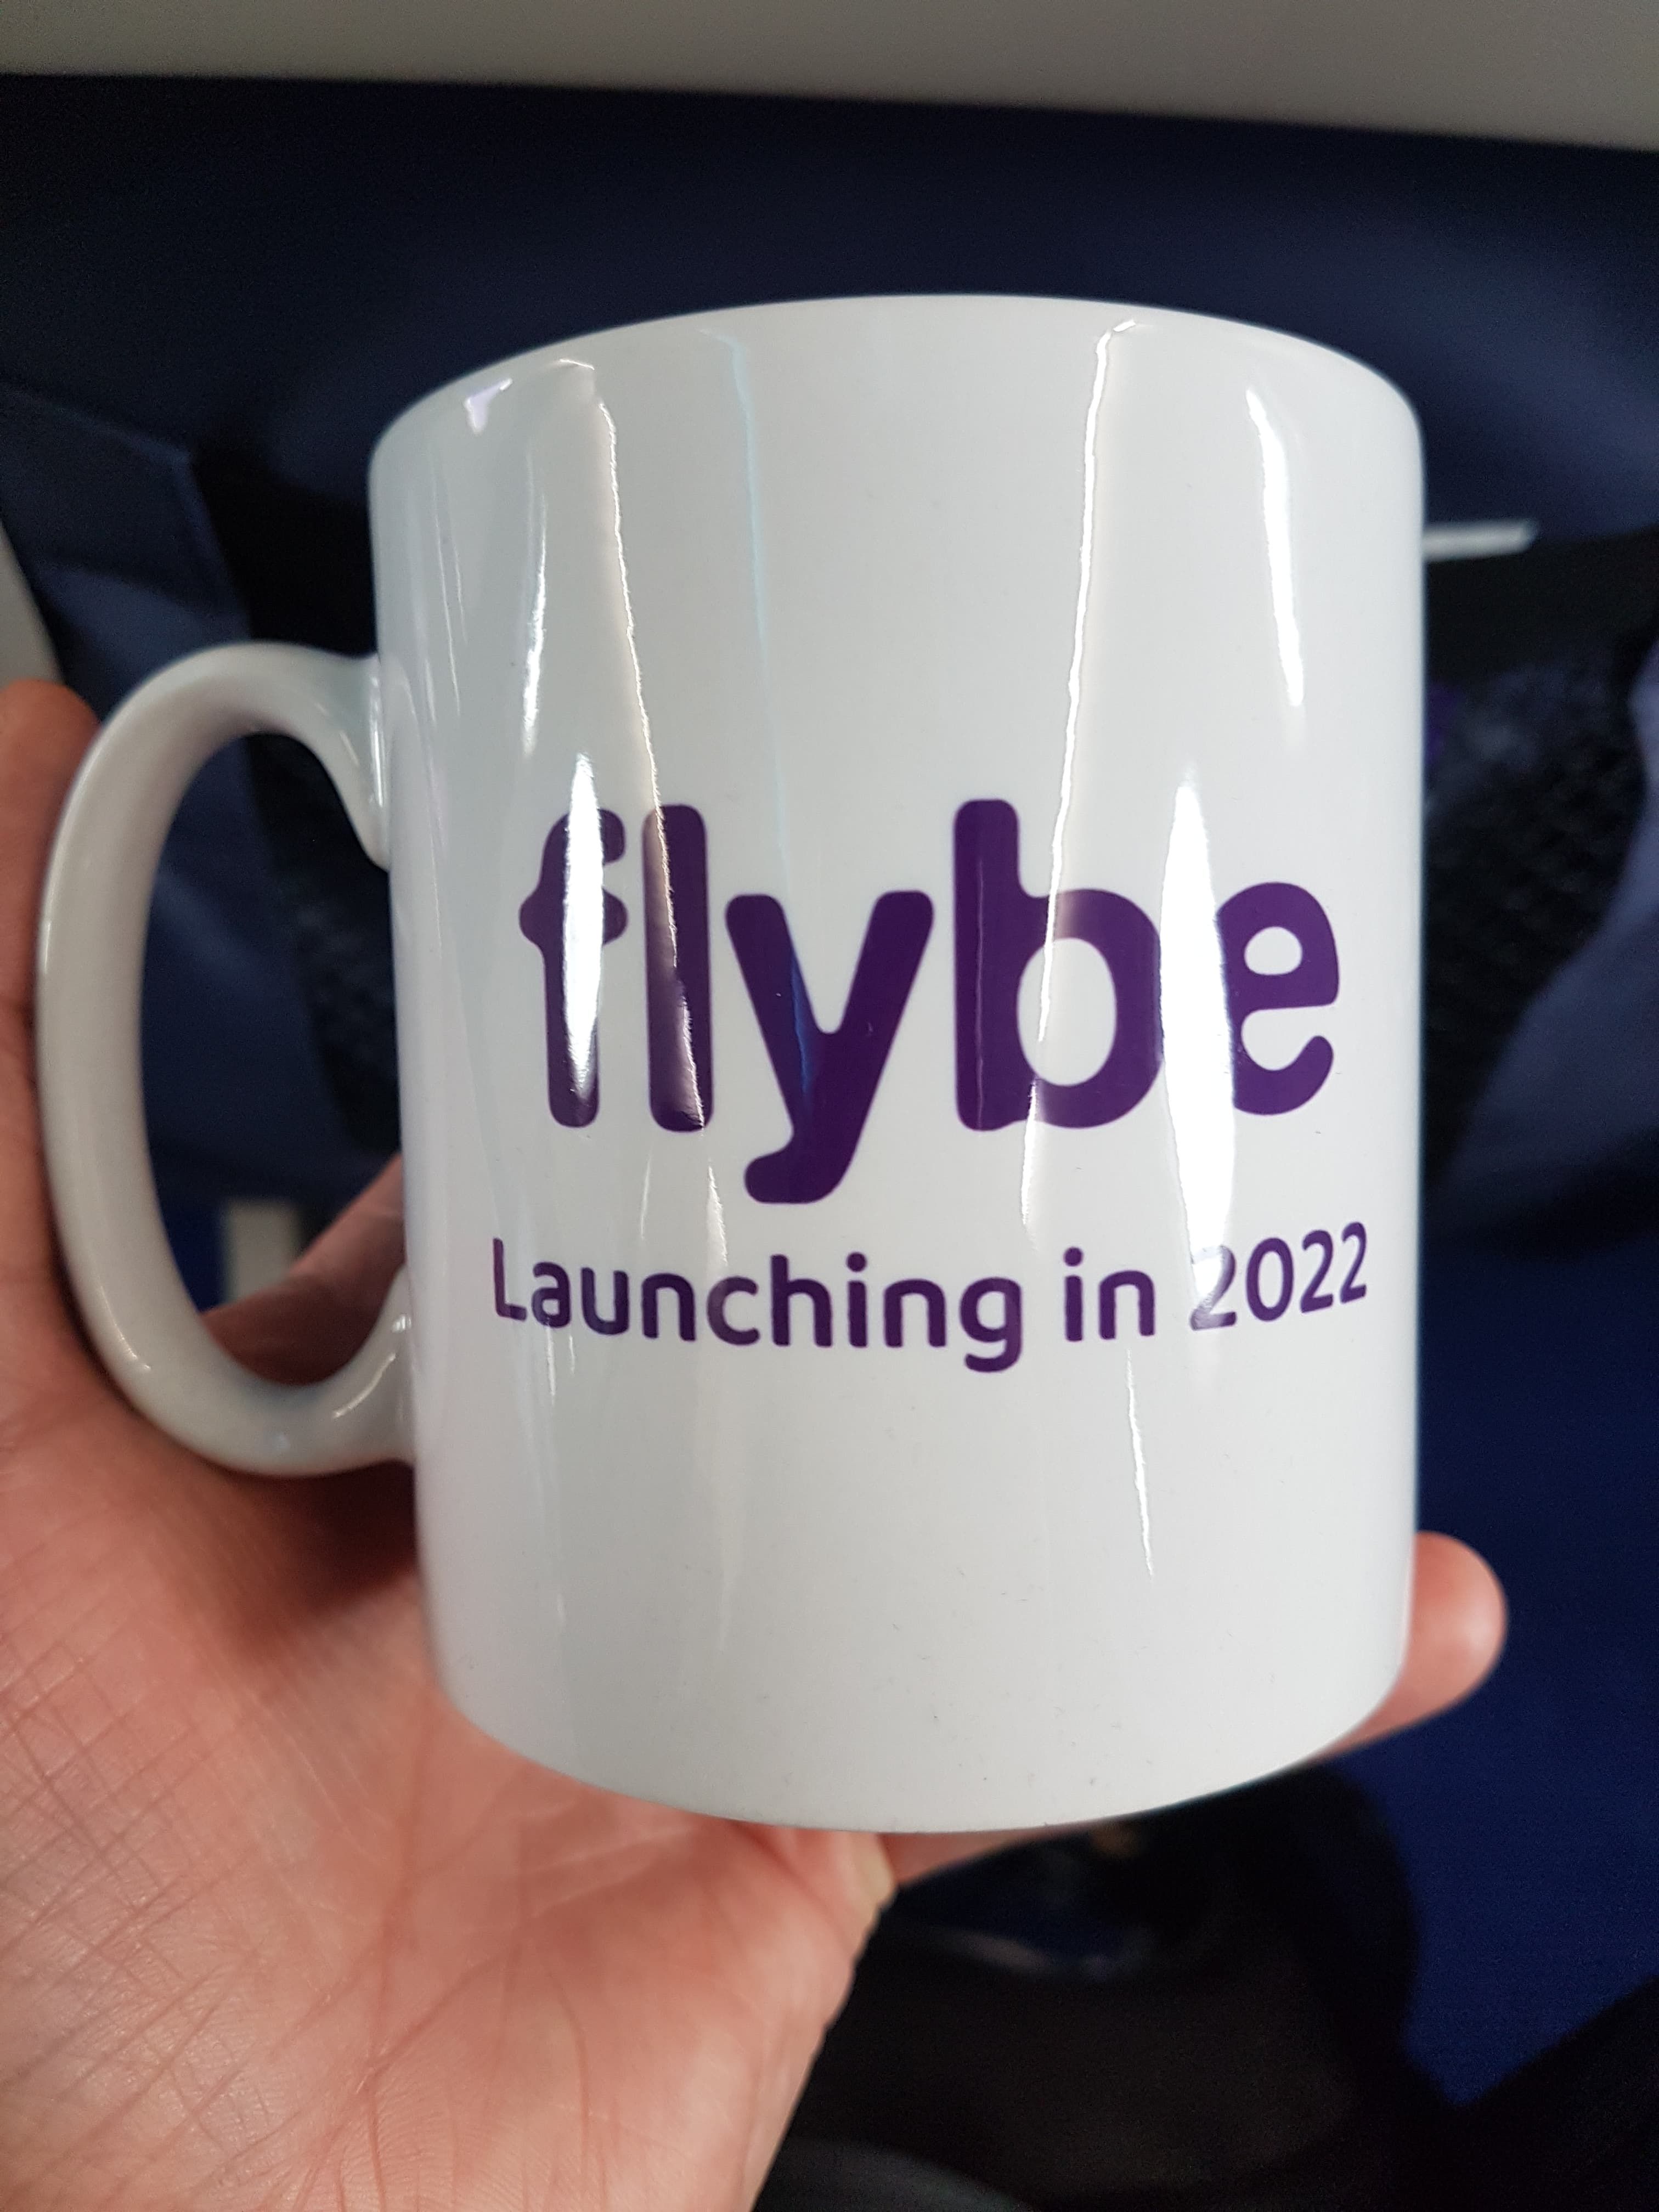 Flybe launch